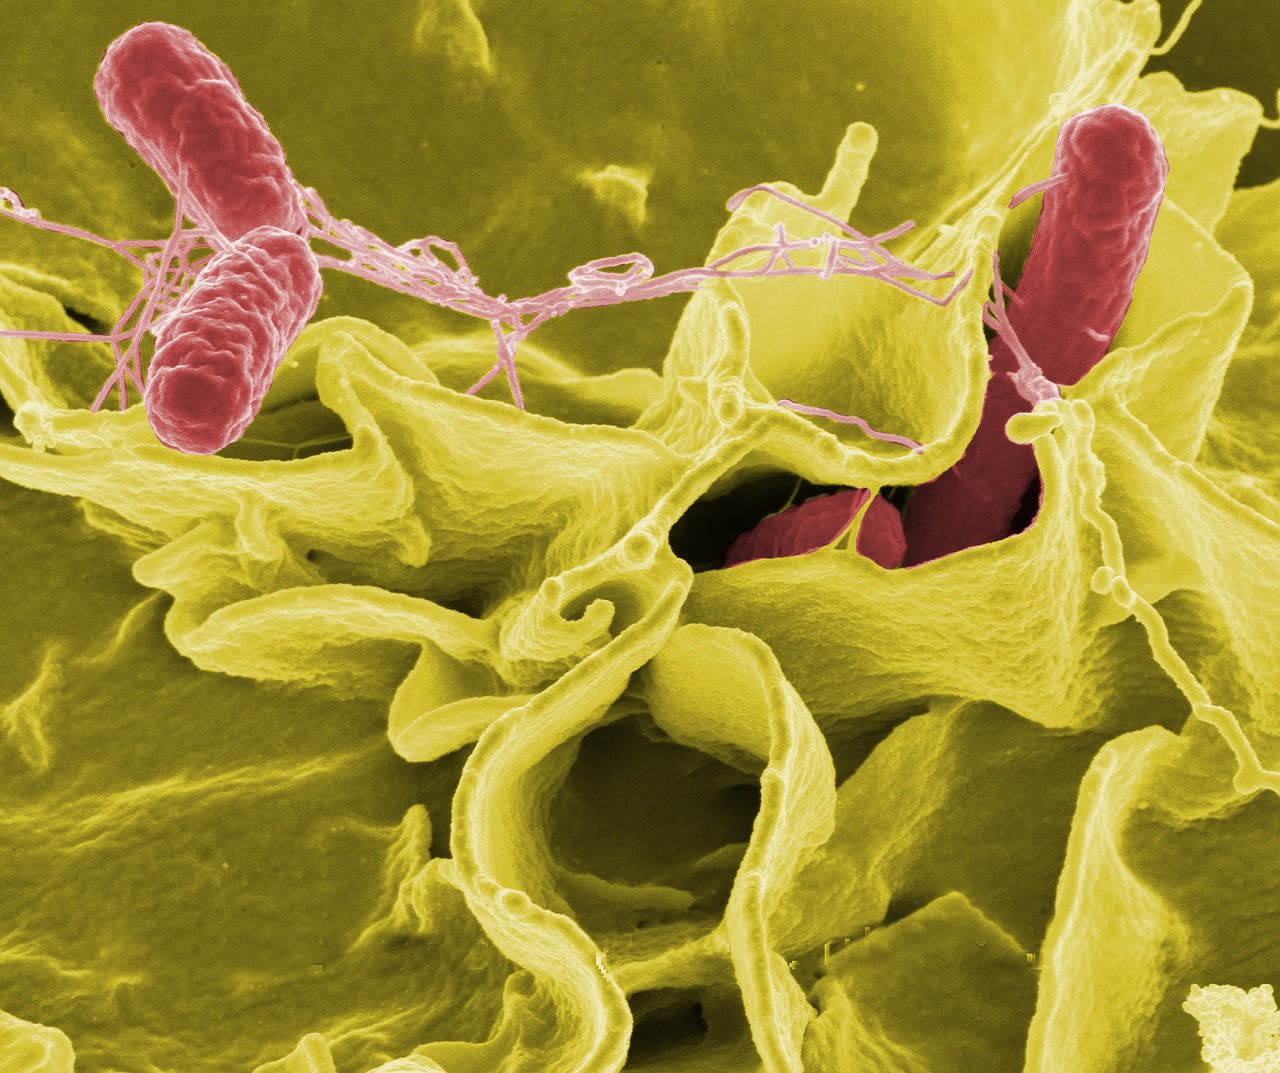 Confirmed cases continue to climb of a multistate outbreak of salmonella infections across the nation.